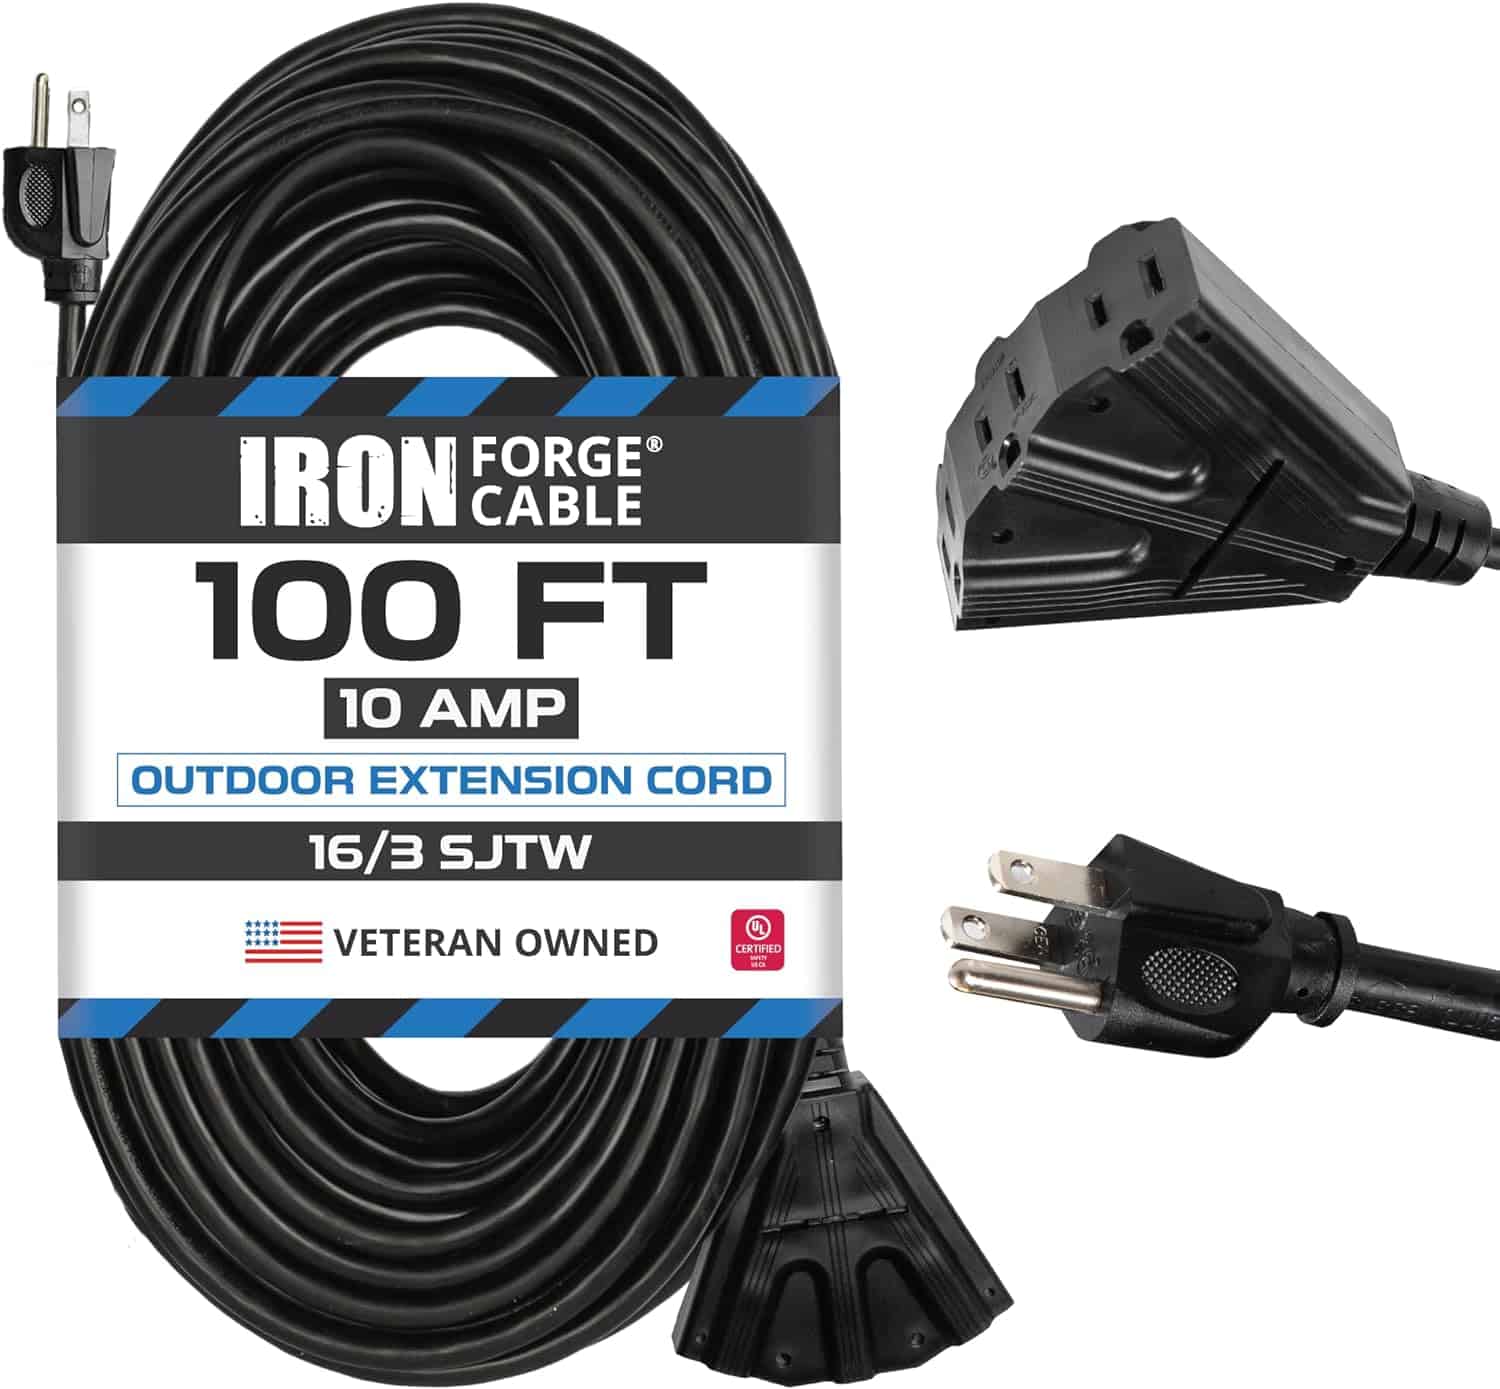 Iron Forge Cable 100ft Extension Cord with 3 Outlet 16 3 Weatherproof 100 ft Black Extension Cord with Multiple Outlets 3 Prong for Landscaping Lawn 1